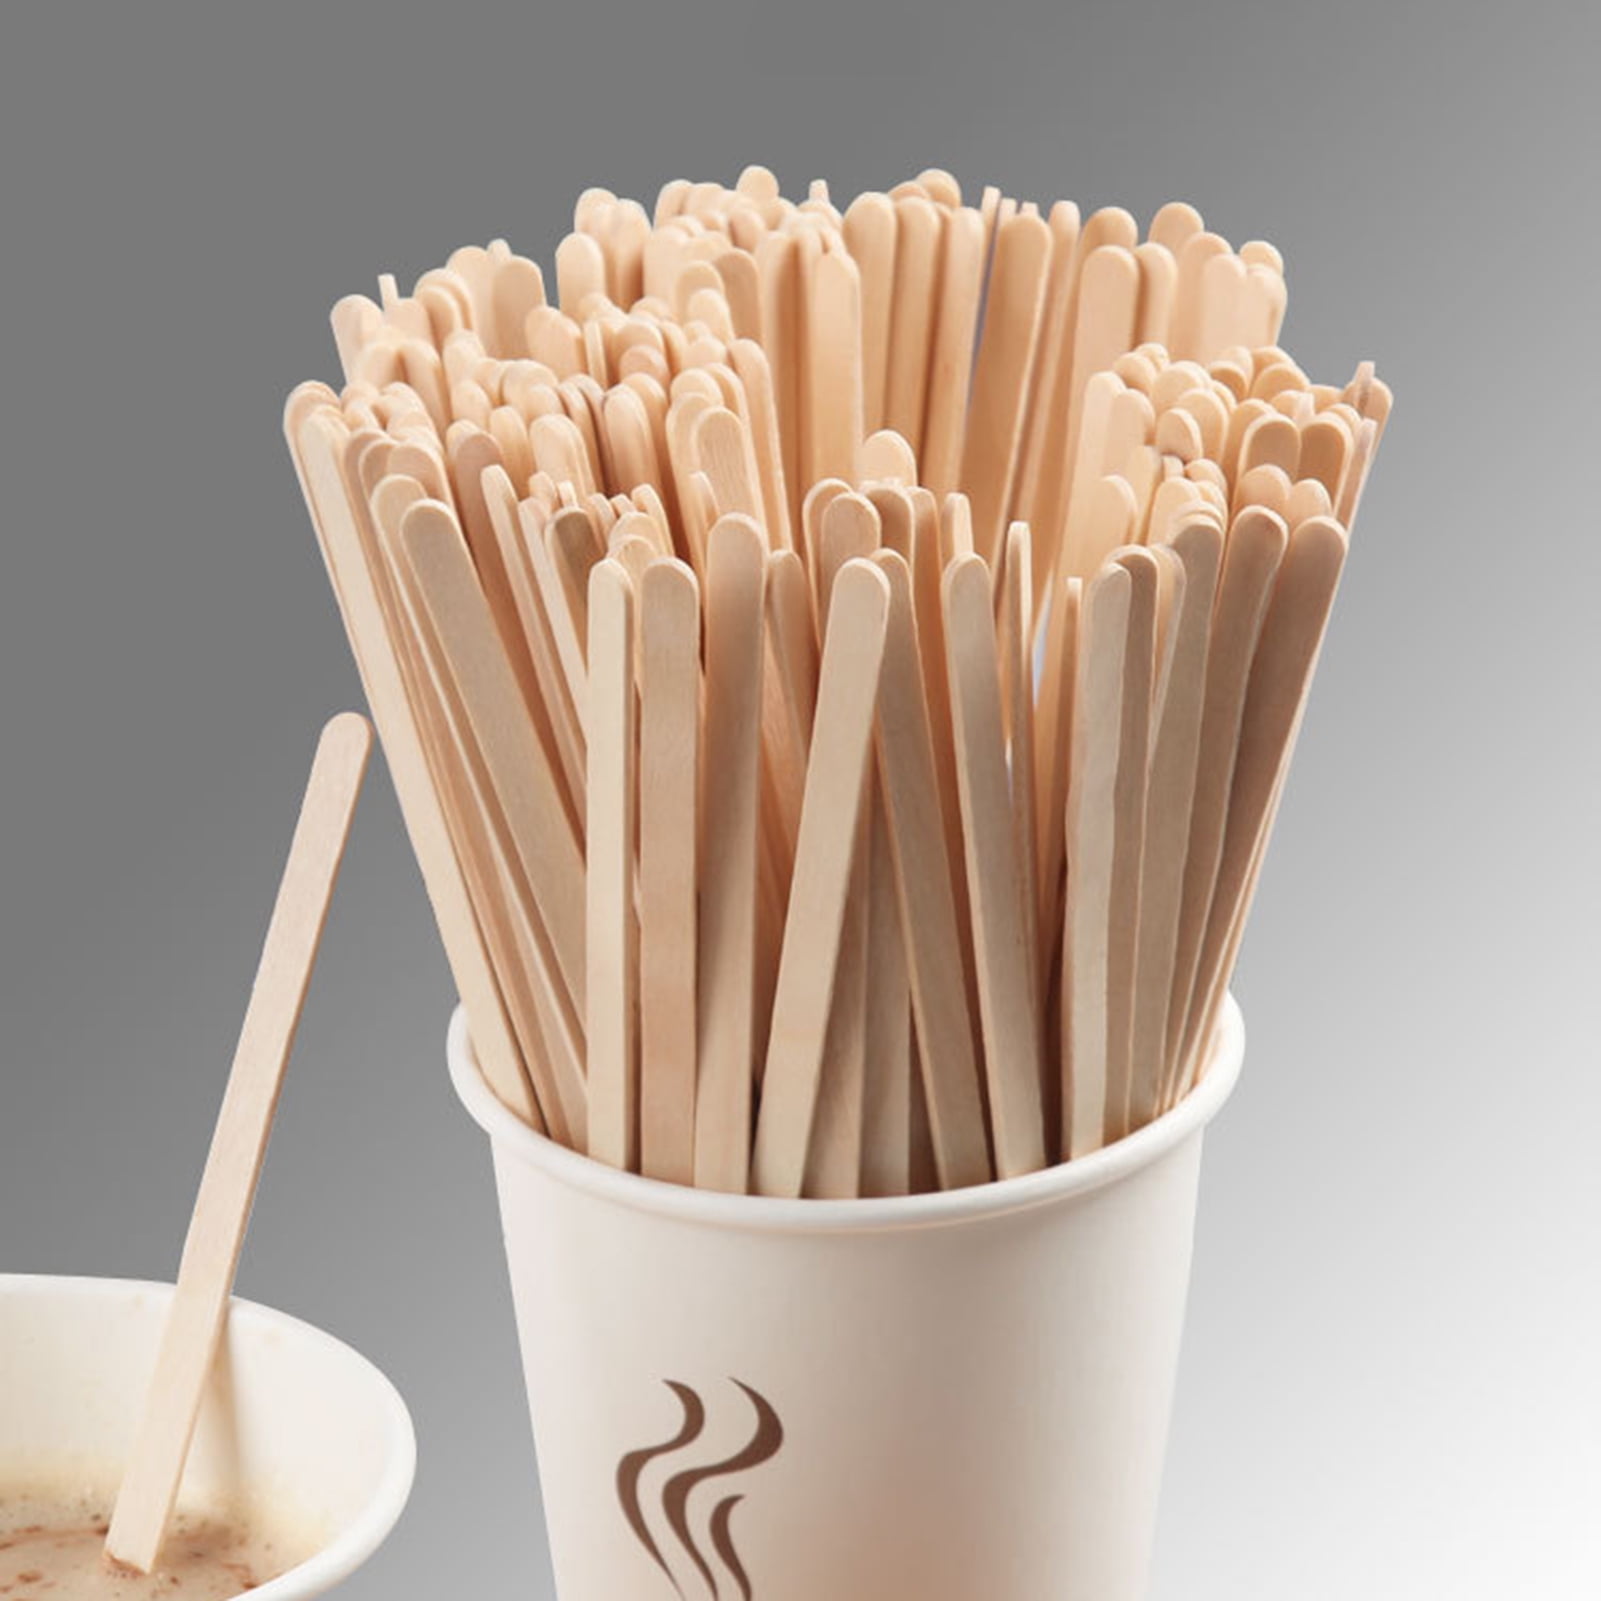 1,000ct Wooden 7.5" Wood Coffee Stirrers Rounded Ends Craft Sticks Stir Rods